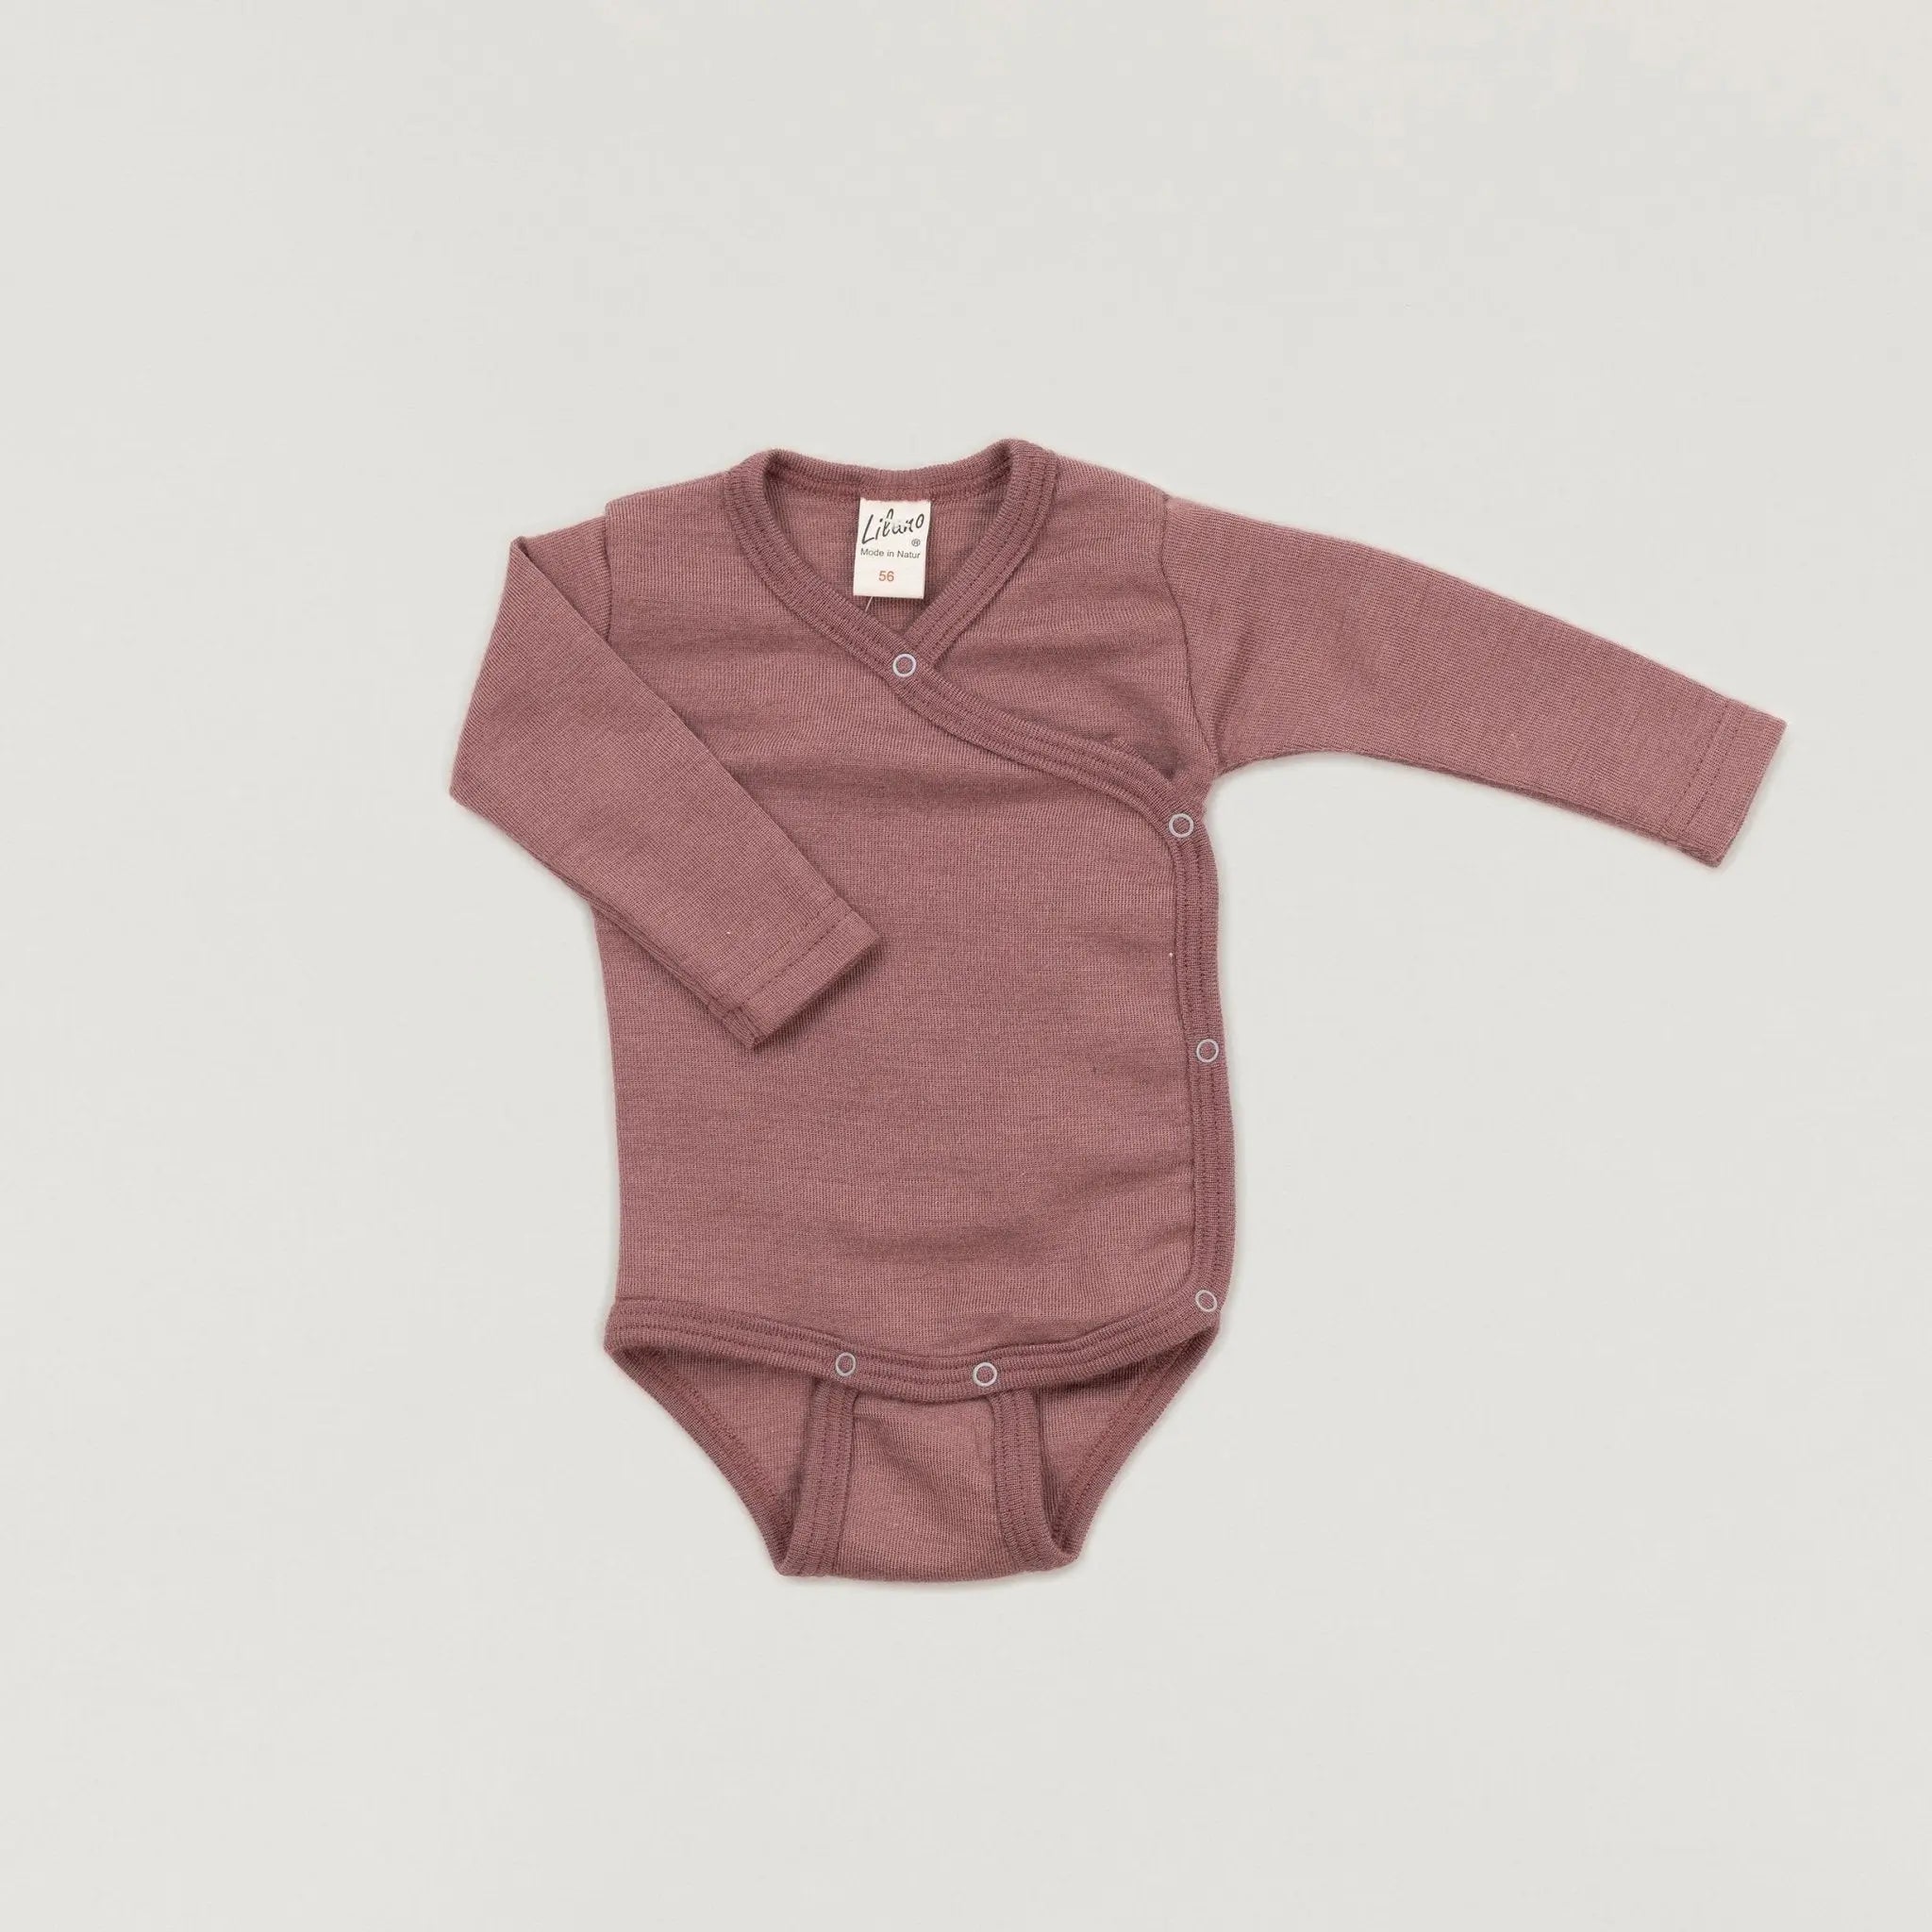 Babybox and Family Lilano Wickelbody aus Wolle & Seide mauve 50 #farbe_mauve